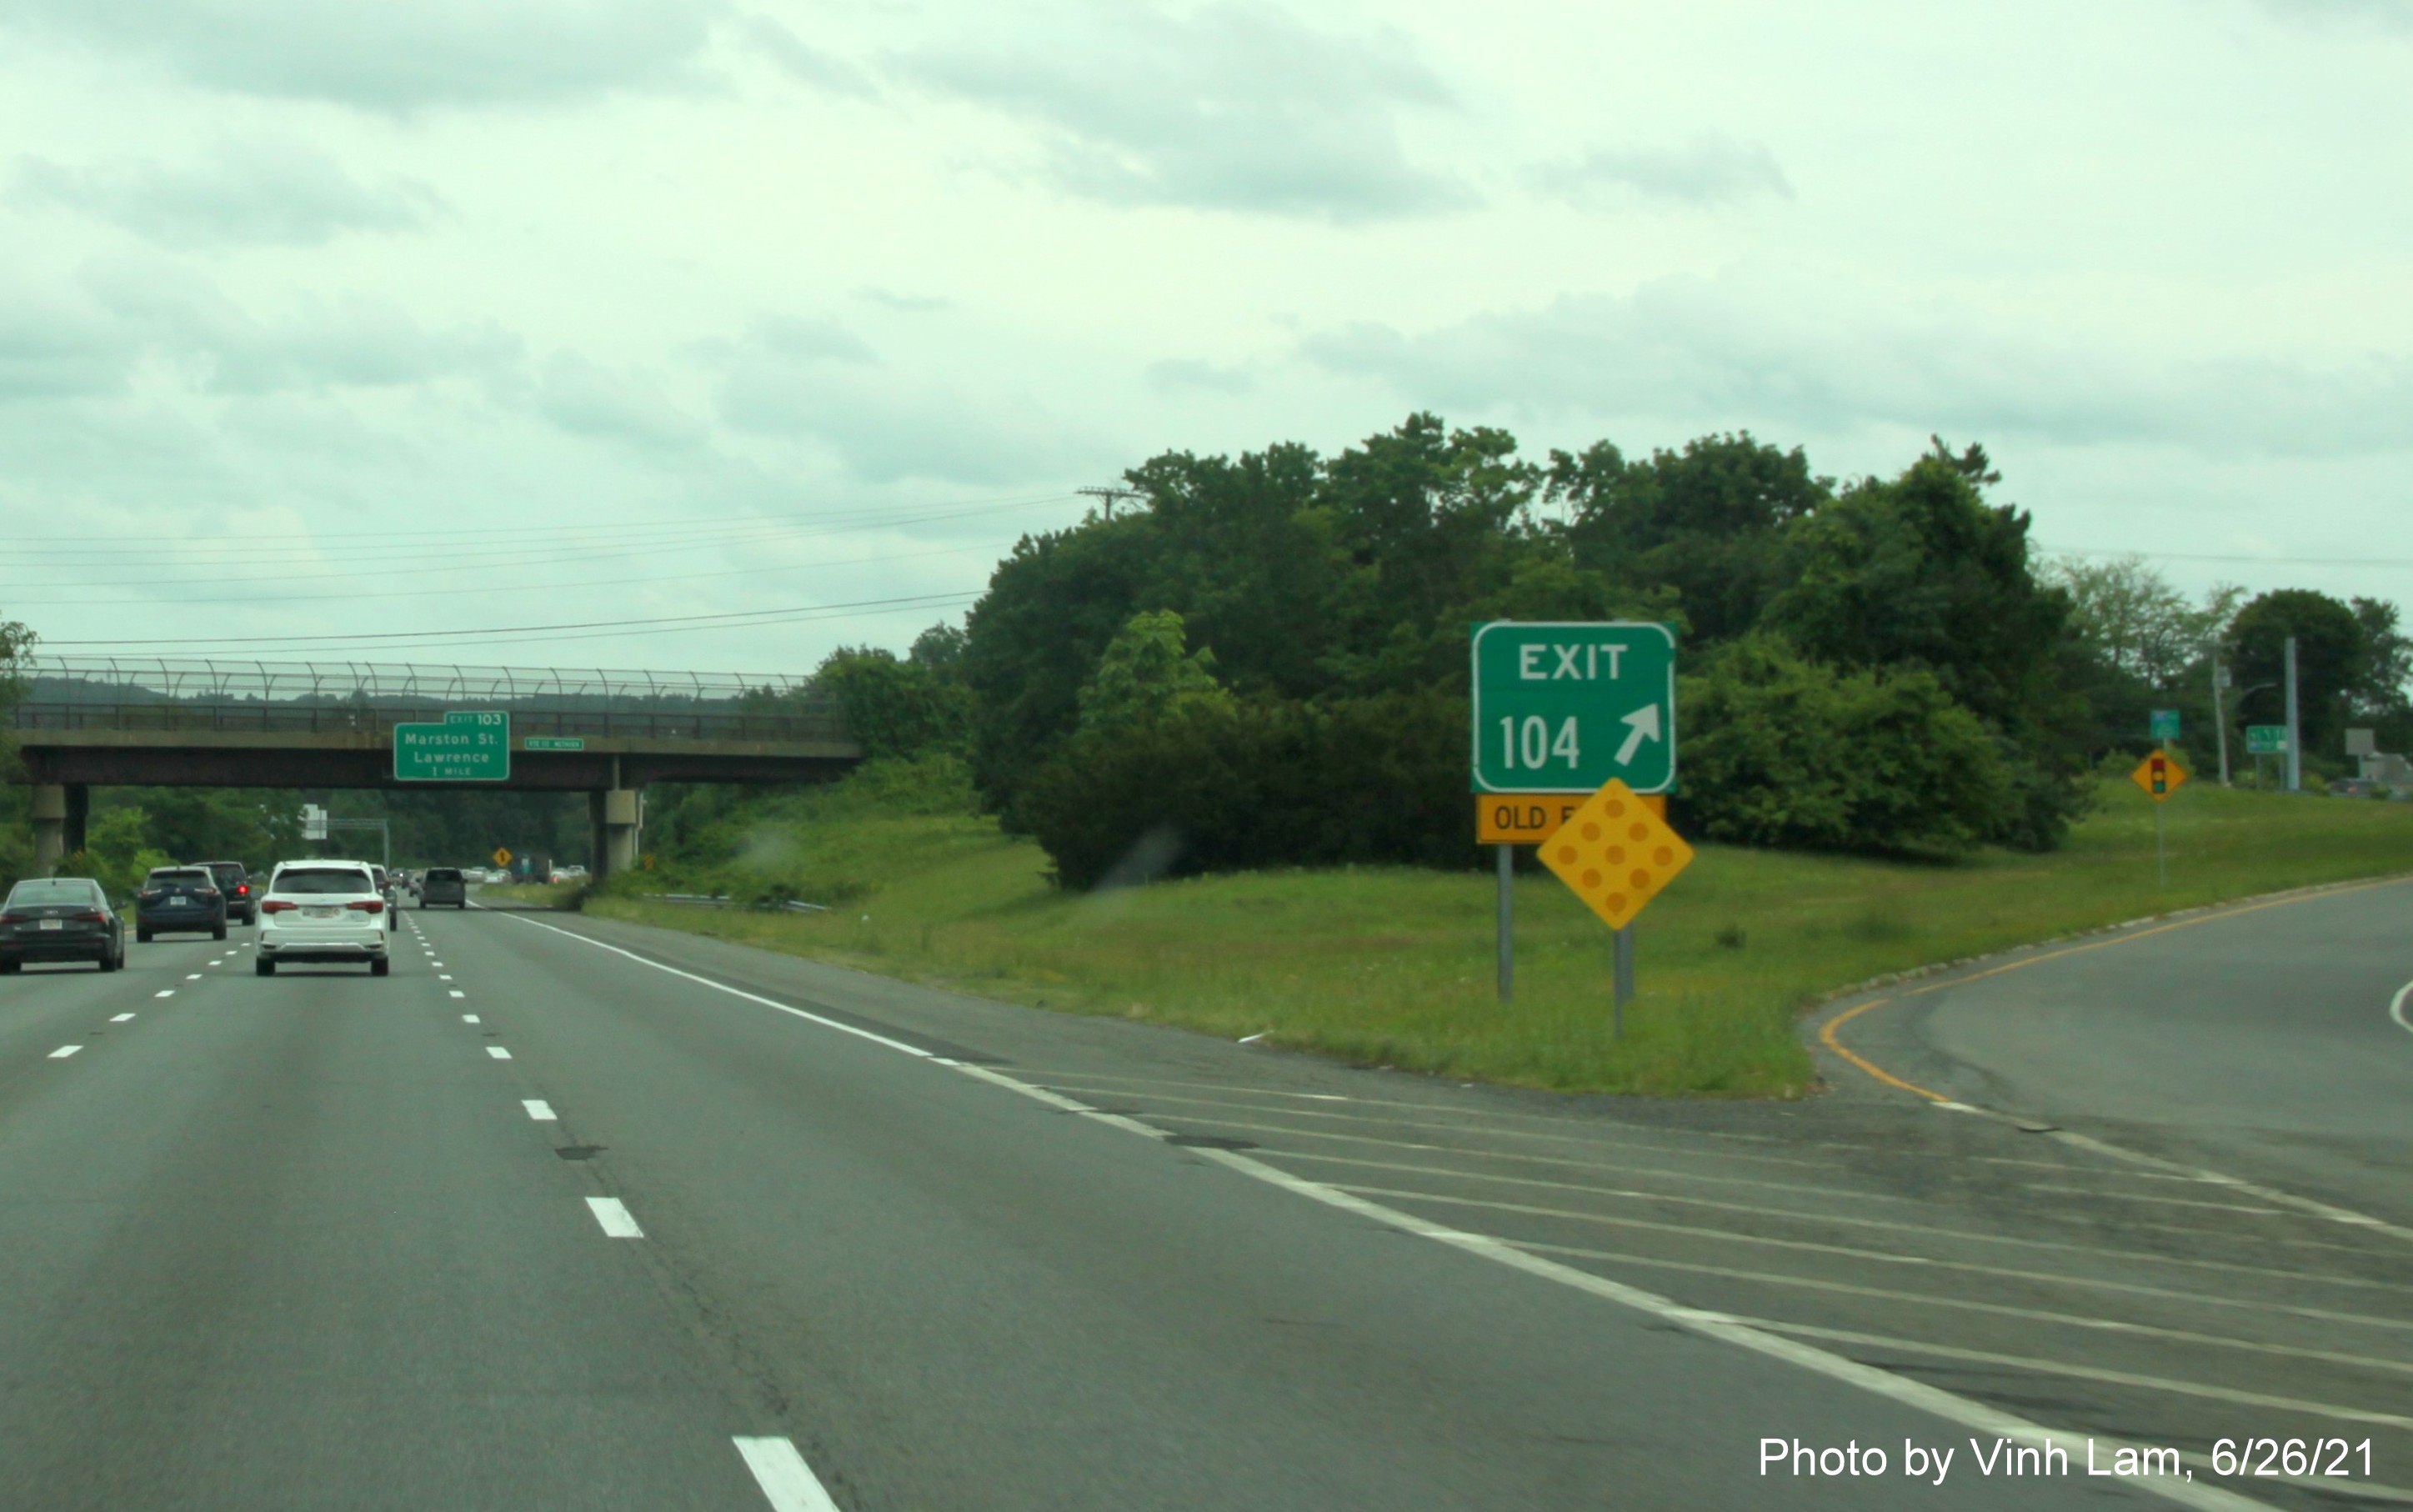 Image of gore sign for MA 110 exit with new milepost based exit number and yellow Old Exit 46 sign below on I-495 South in Lawrence, photo by Vinh Lam, June 2021